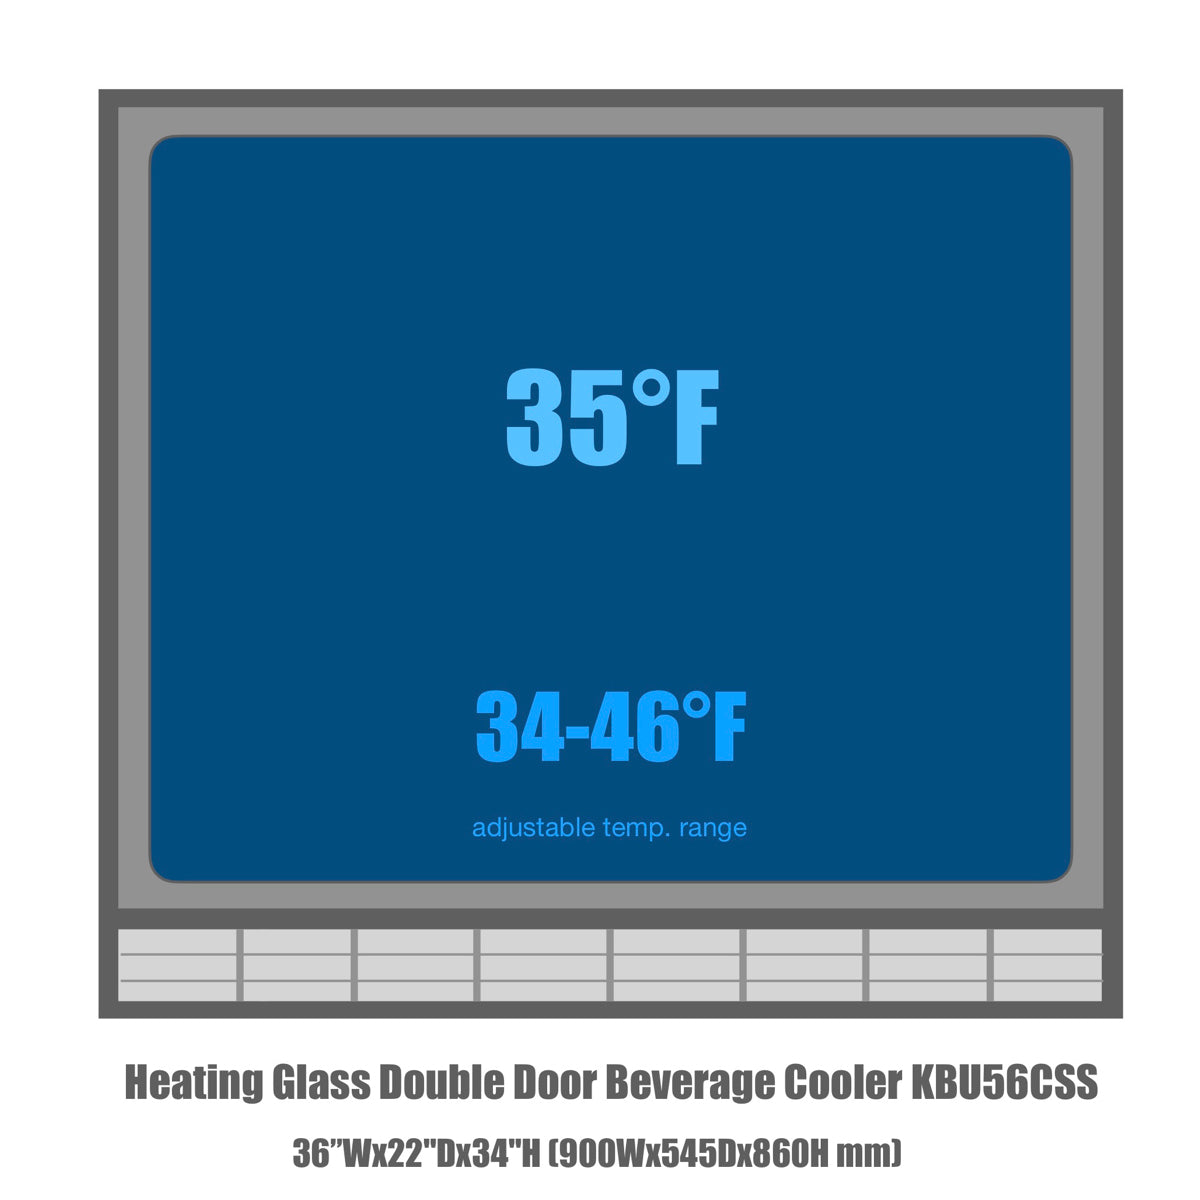 Kings Bottle 36" Heating Glass 2 Door Built In Beverage Fridge: A blue rectangular sign with white text, displaying product details and specifications.